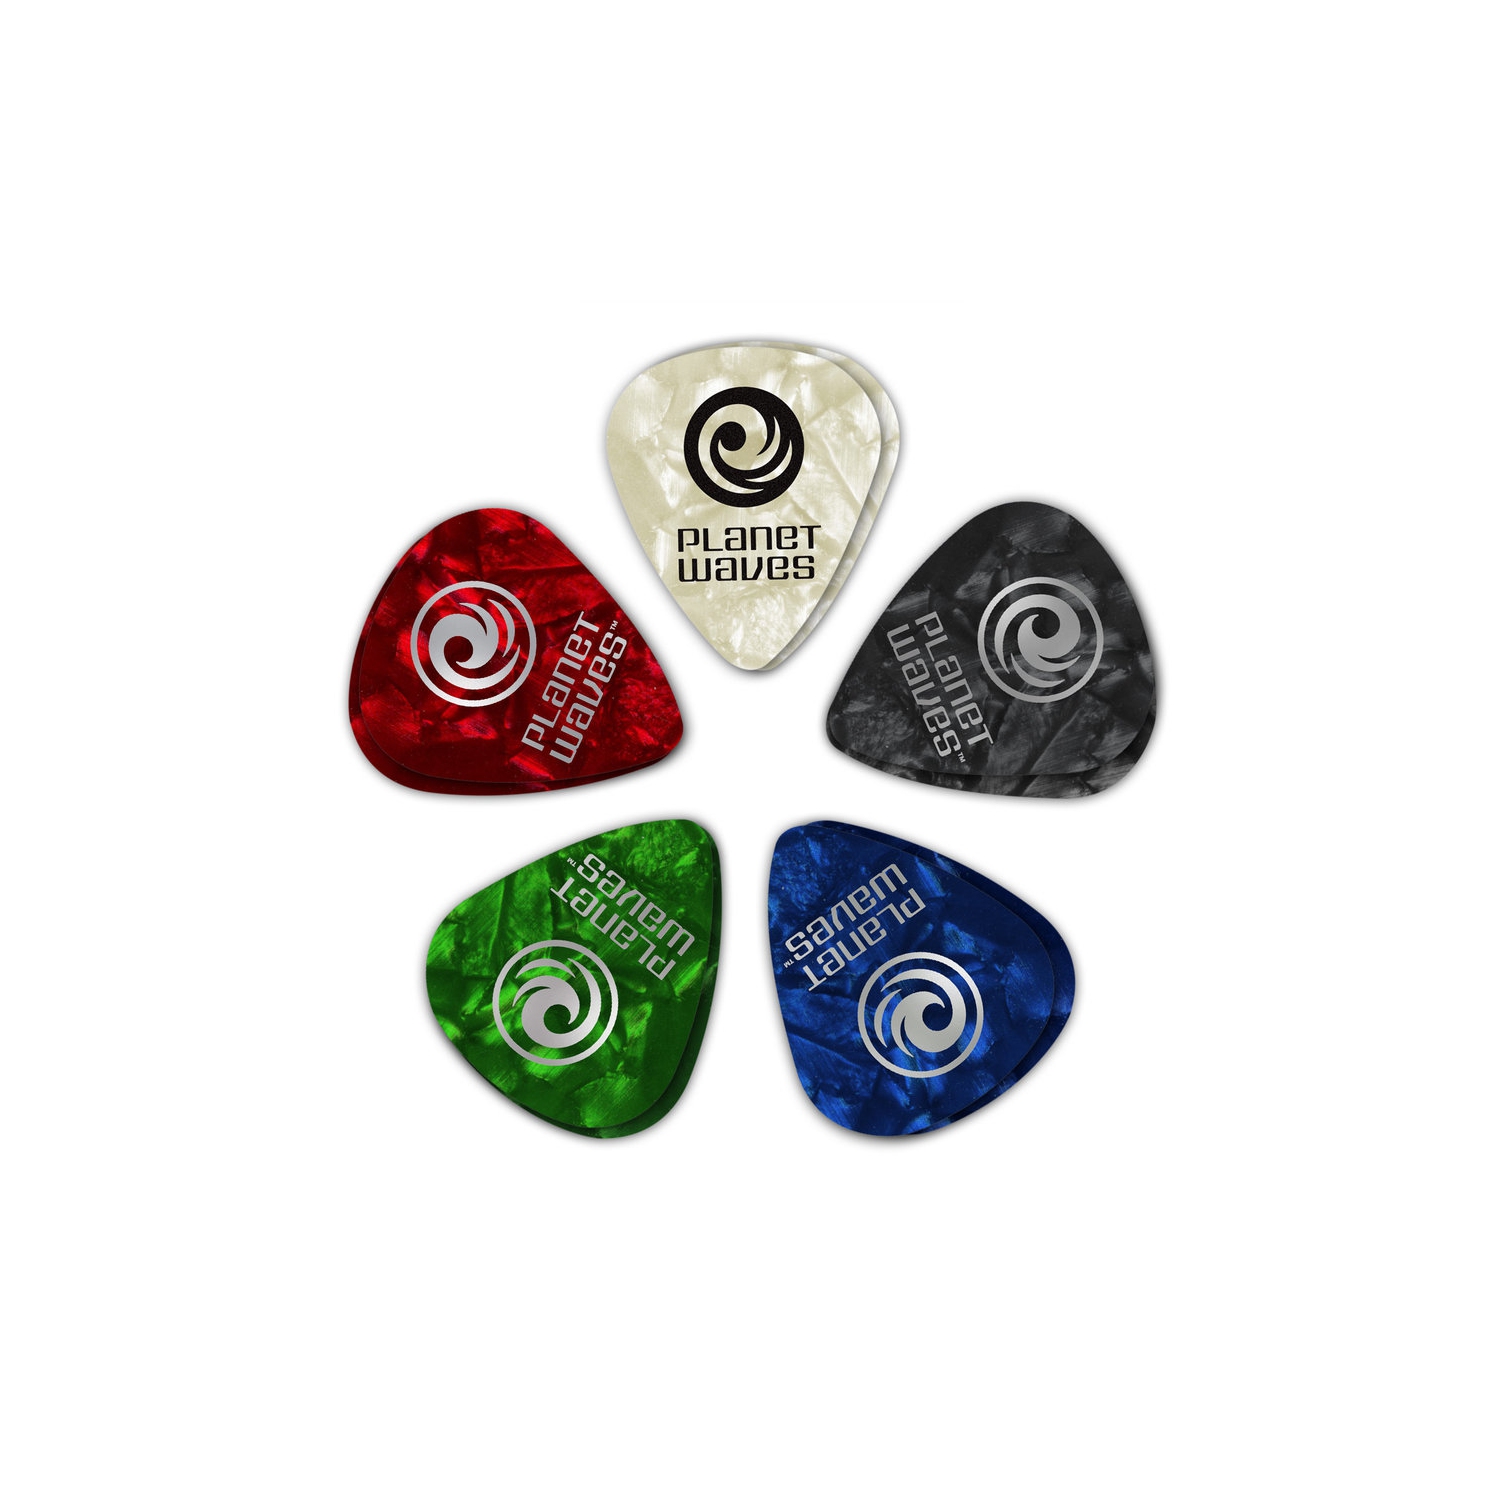 Planet Waves Classic Pearl Celluloid Guitar Picks - Extra Heavy, Assorted 10 Pack